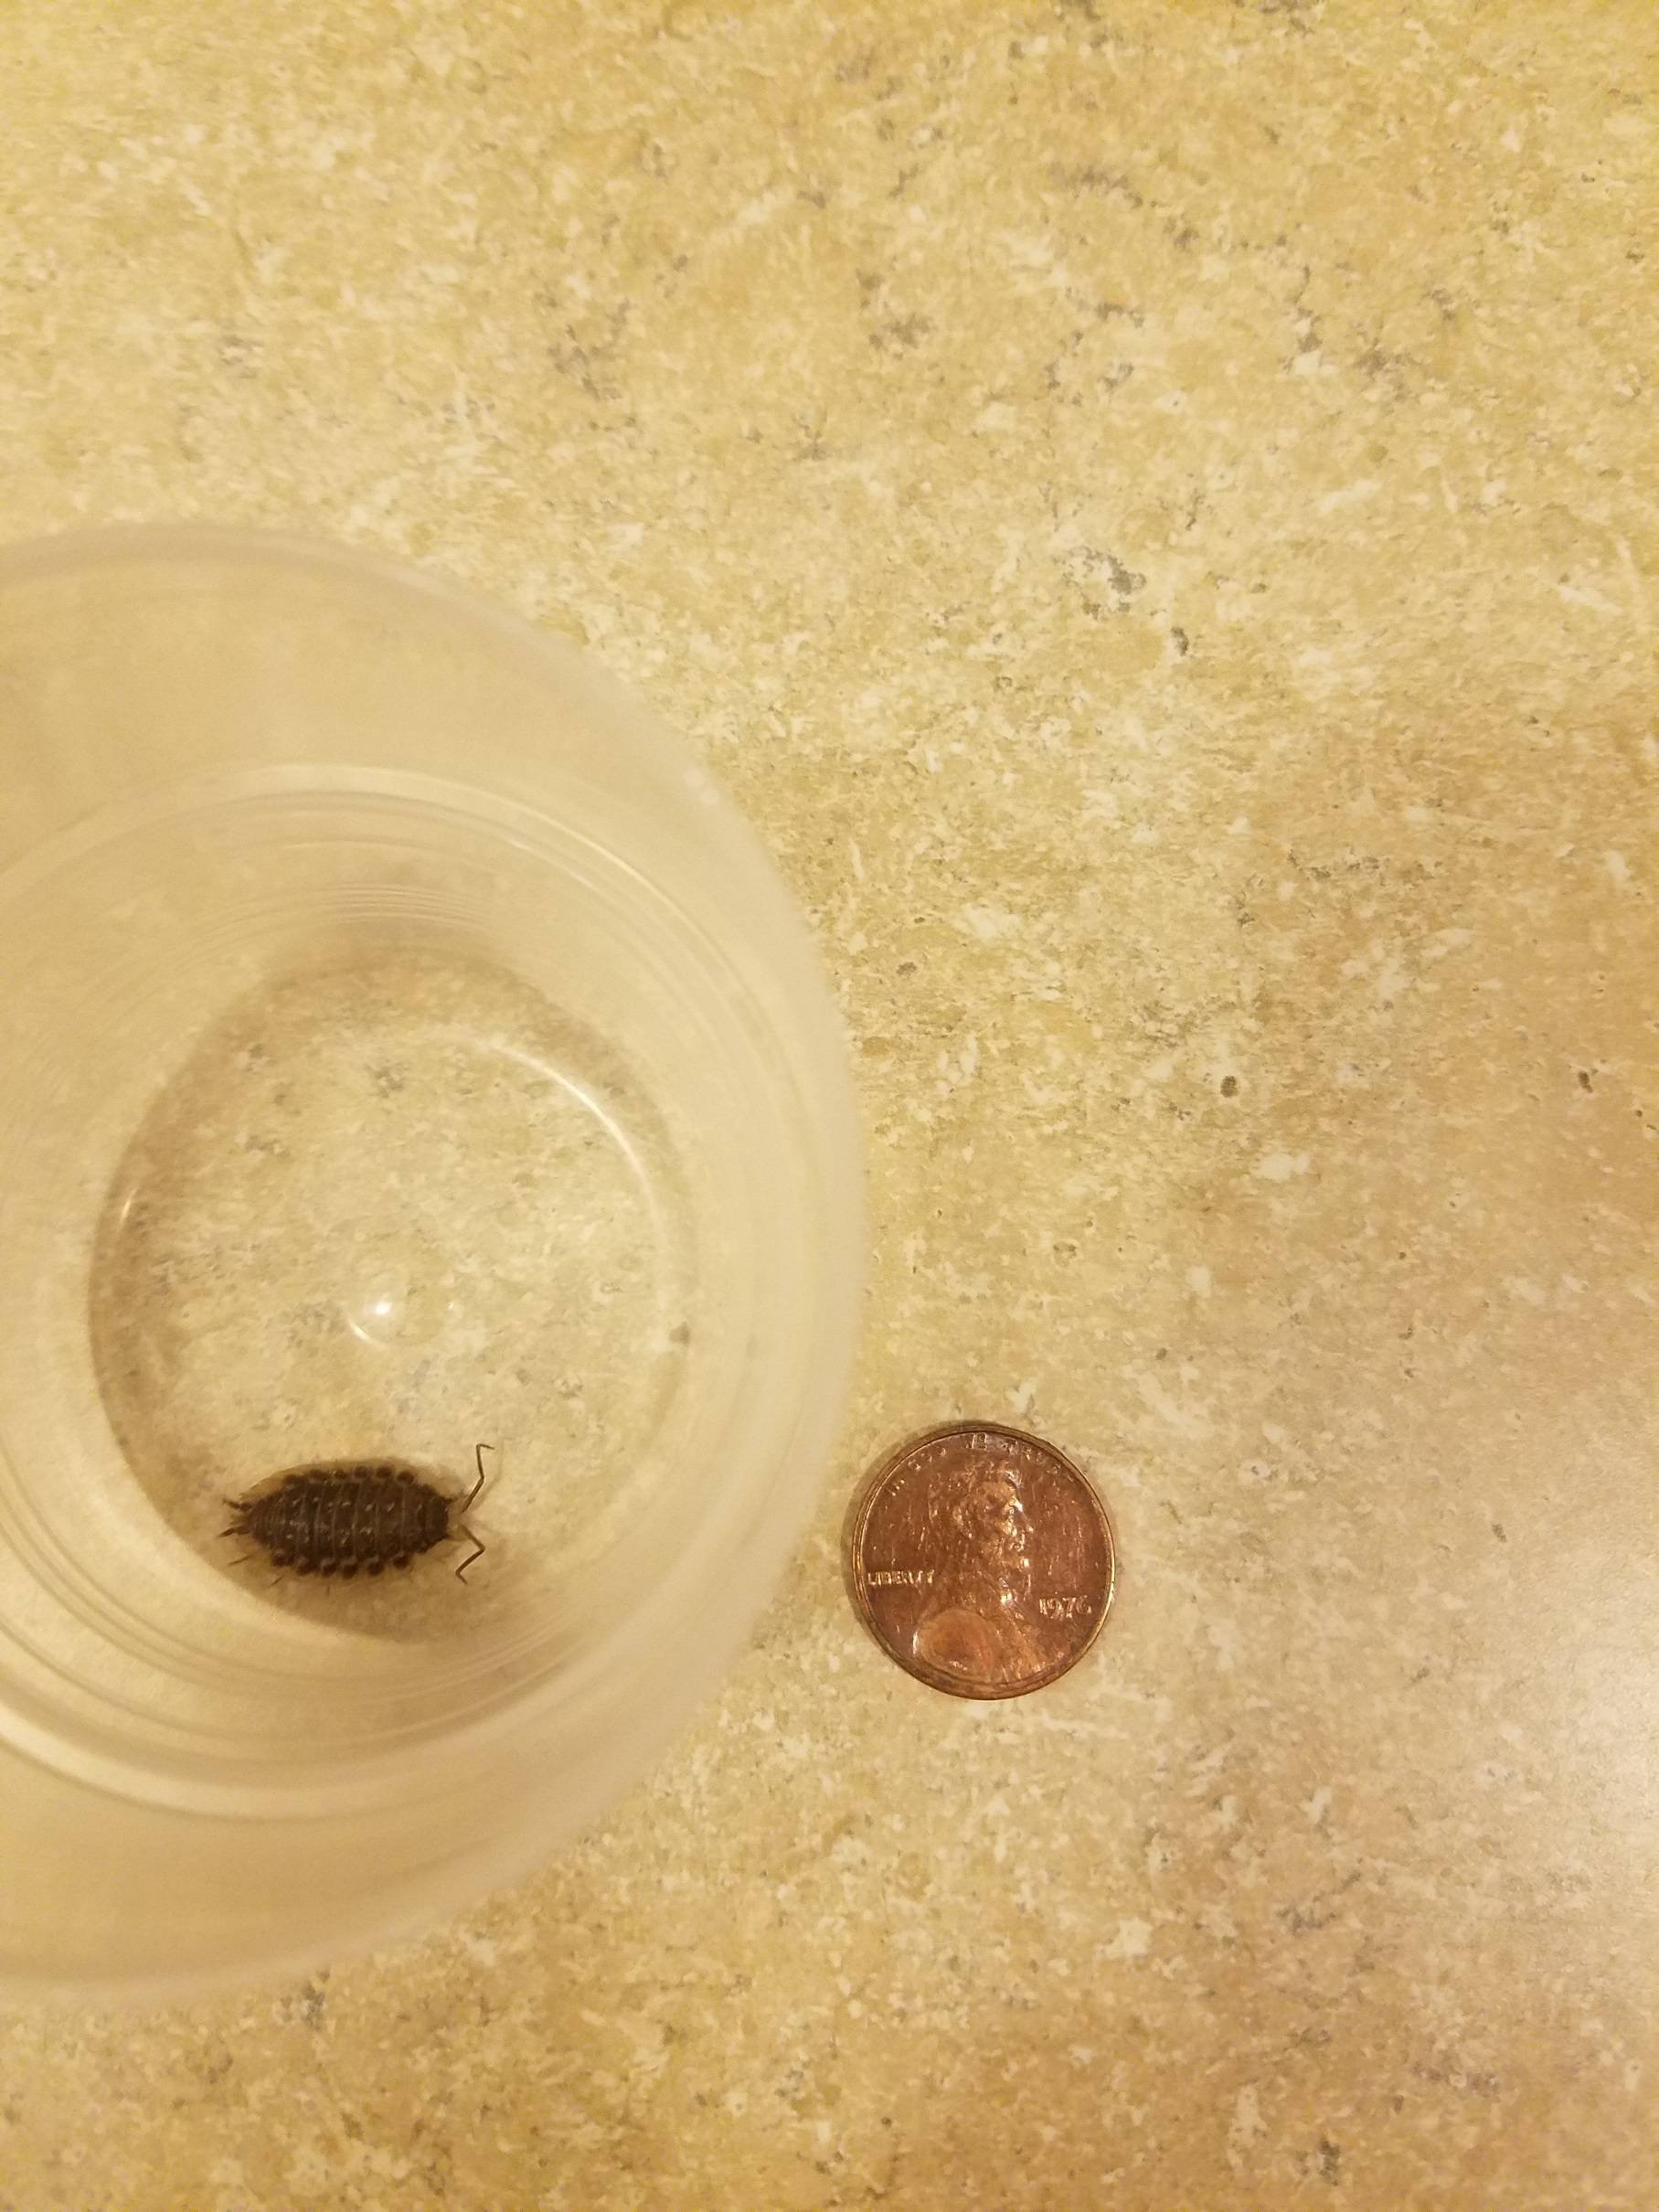 Penny for scale